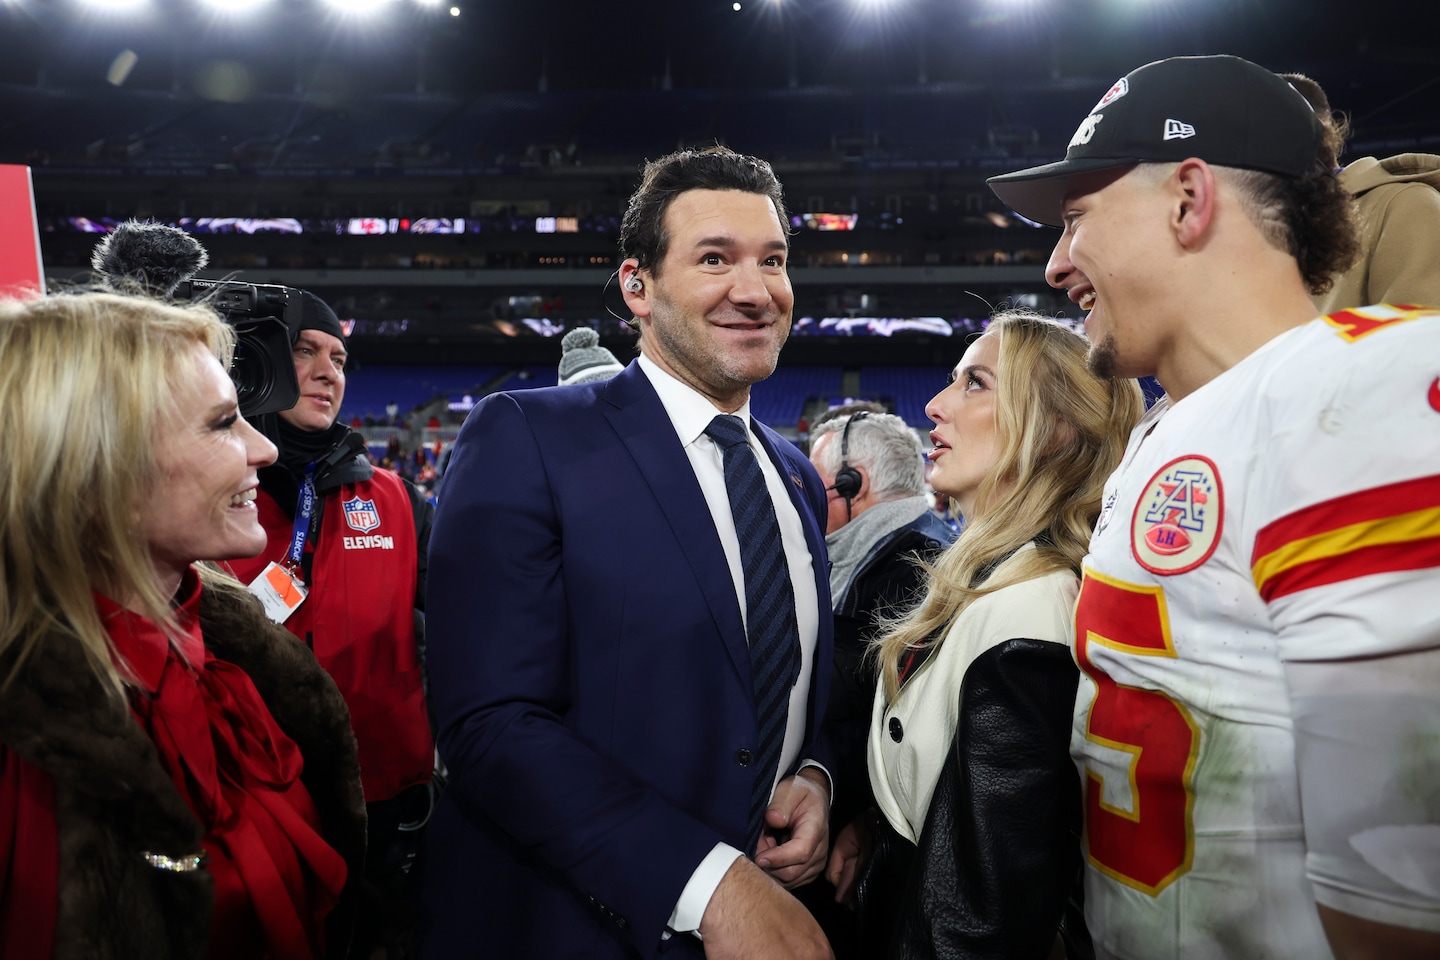 Tony Romo, once CBS’s ‘golden boy,’ brushes off the backlash